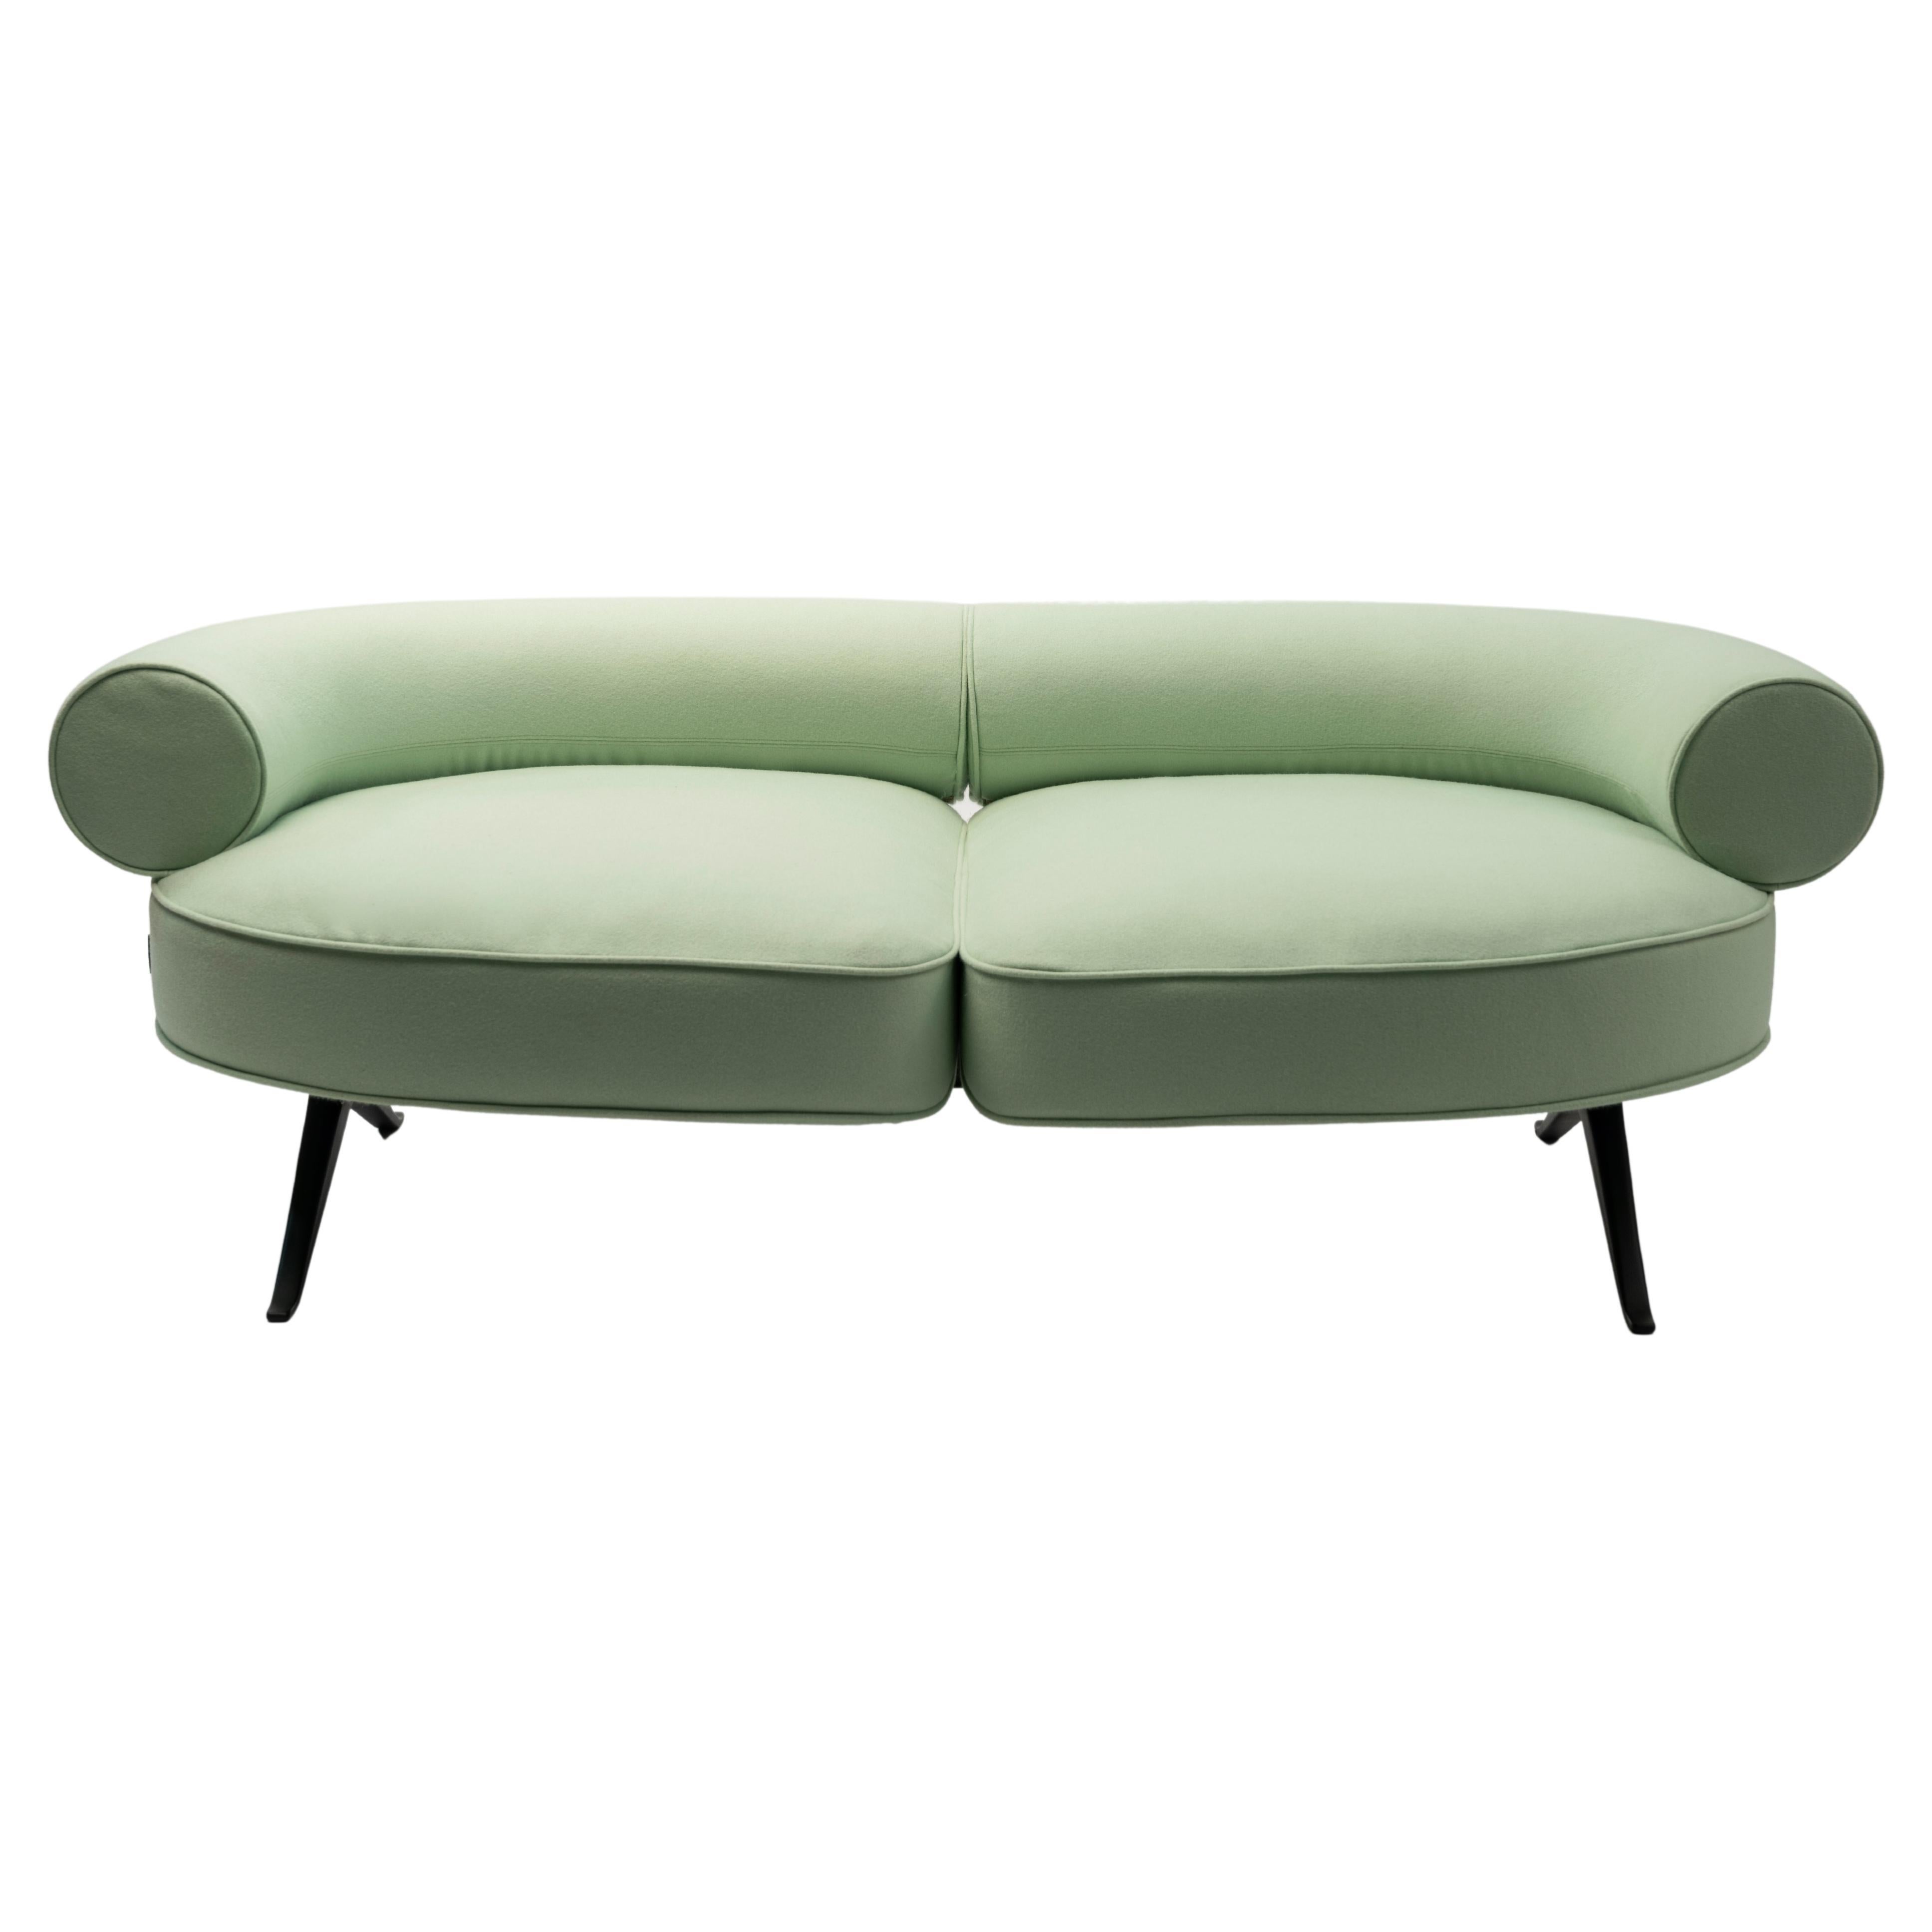 As in a game that frees the imagination and possibilities, Luizet is a modular sofa system that invites to combine together various elements by a distinctive geometry.
An arched angular piece, a central square and a circular one, available both as